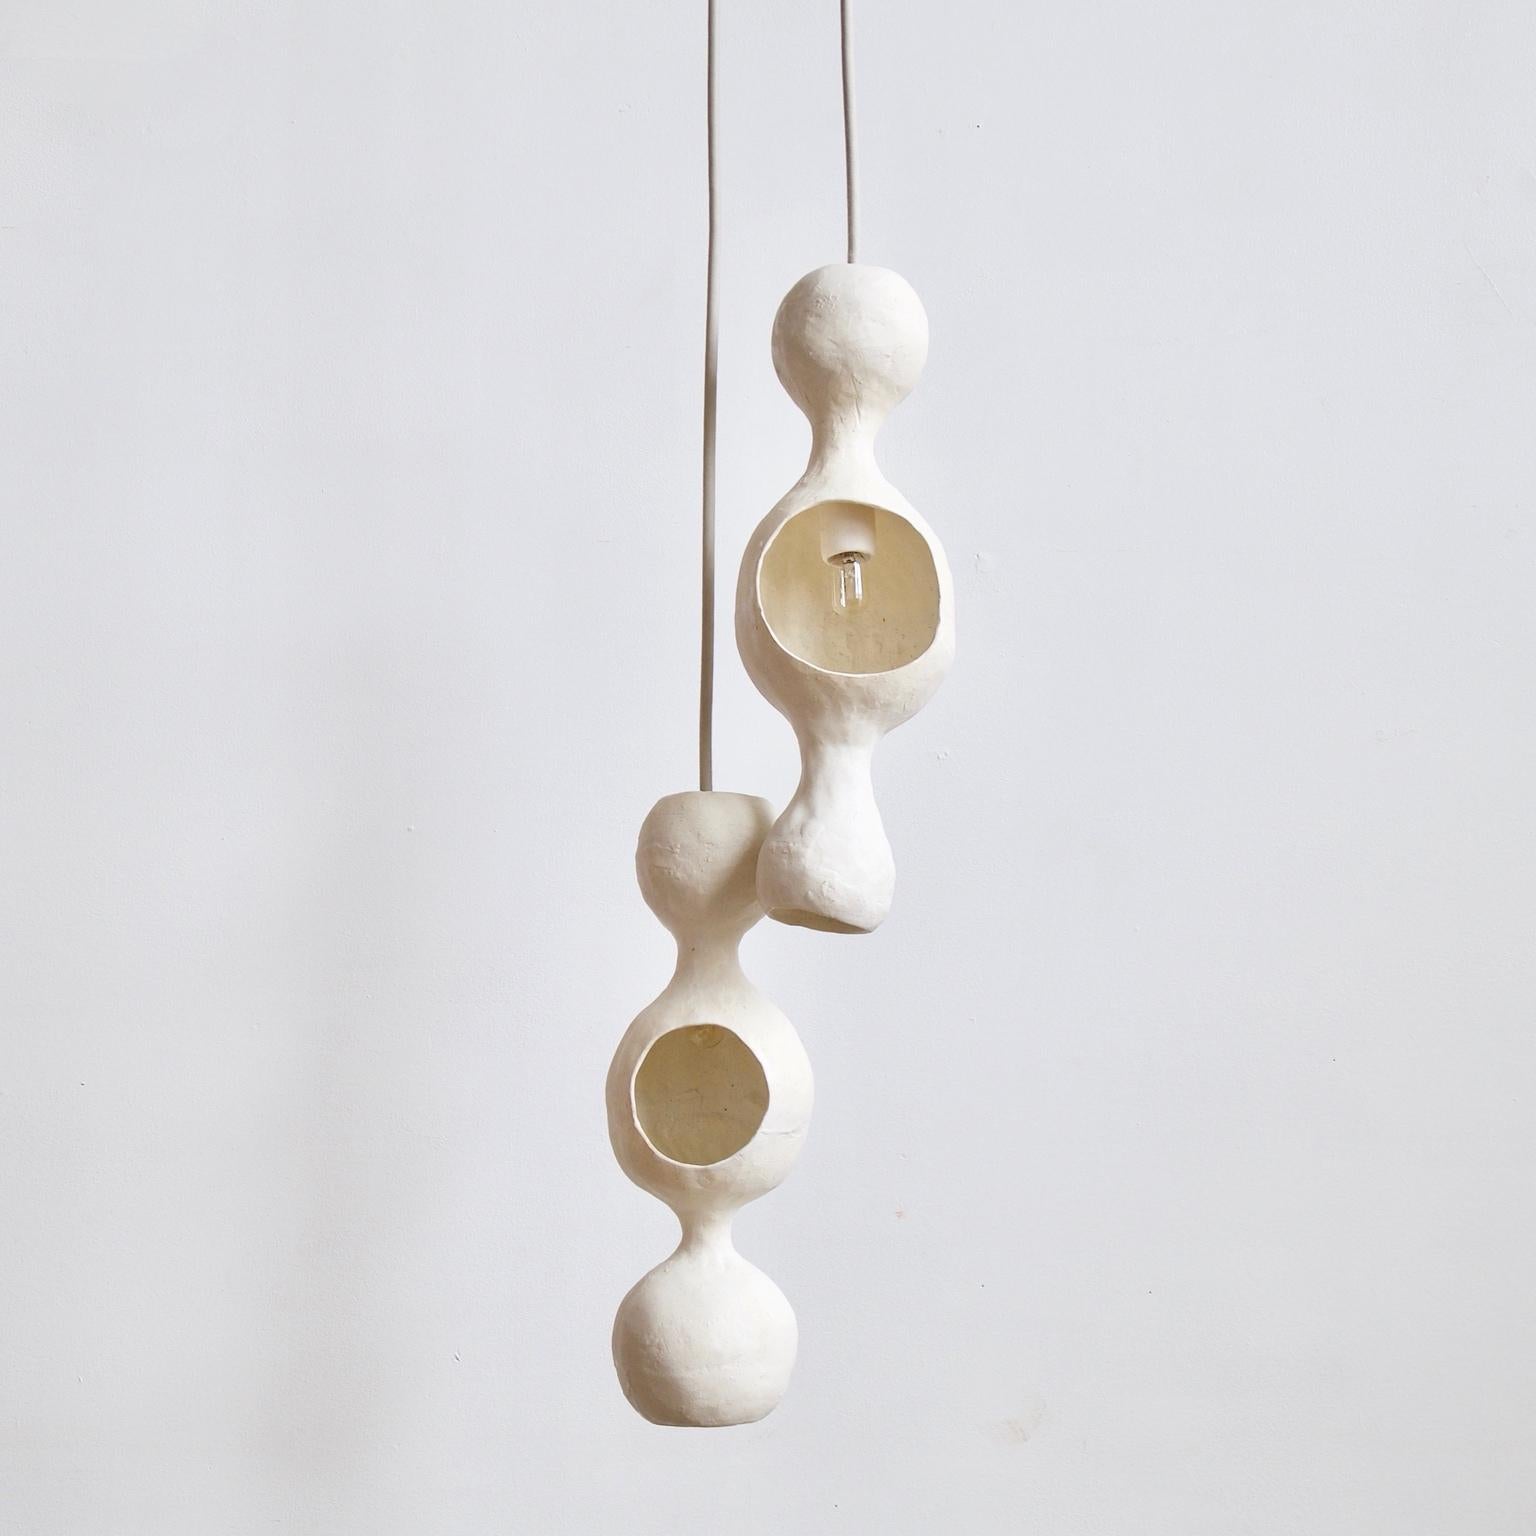 White Bowerbird couple is a contemporary double-shell hand-built ceramic pendant lamp finished in a matte white glaze with a warm glow reflecting off of a round joyful form. Each shell is individually hand formed and unique, creating a pleasant